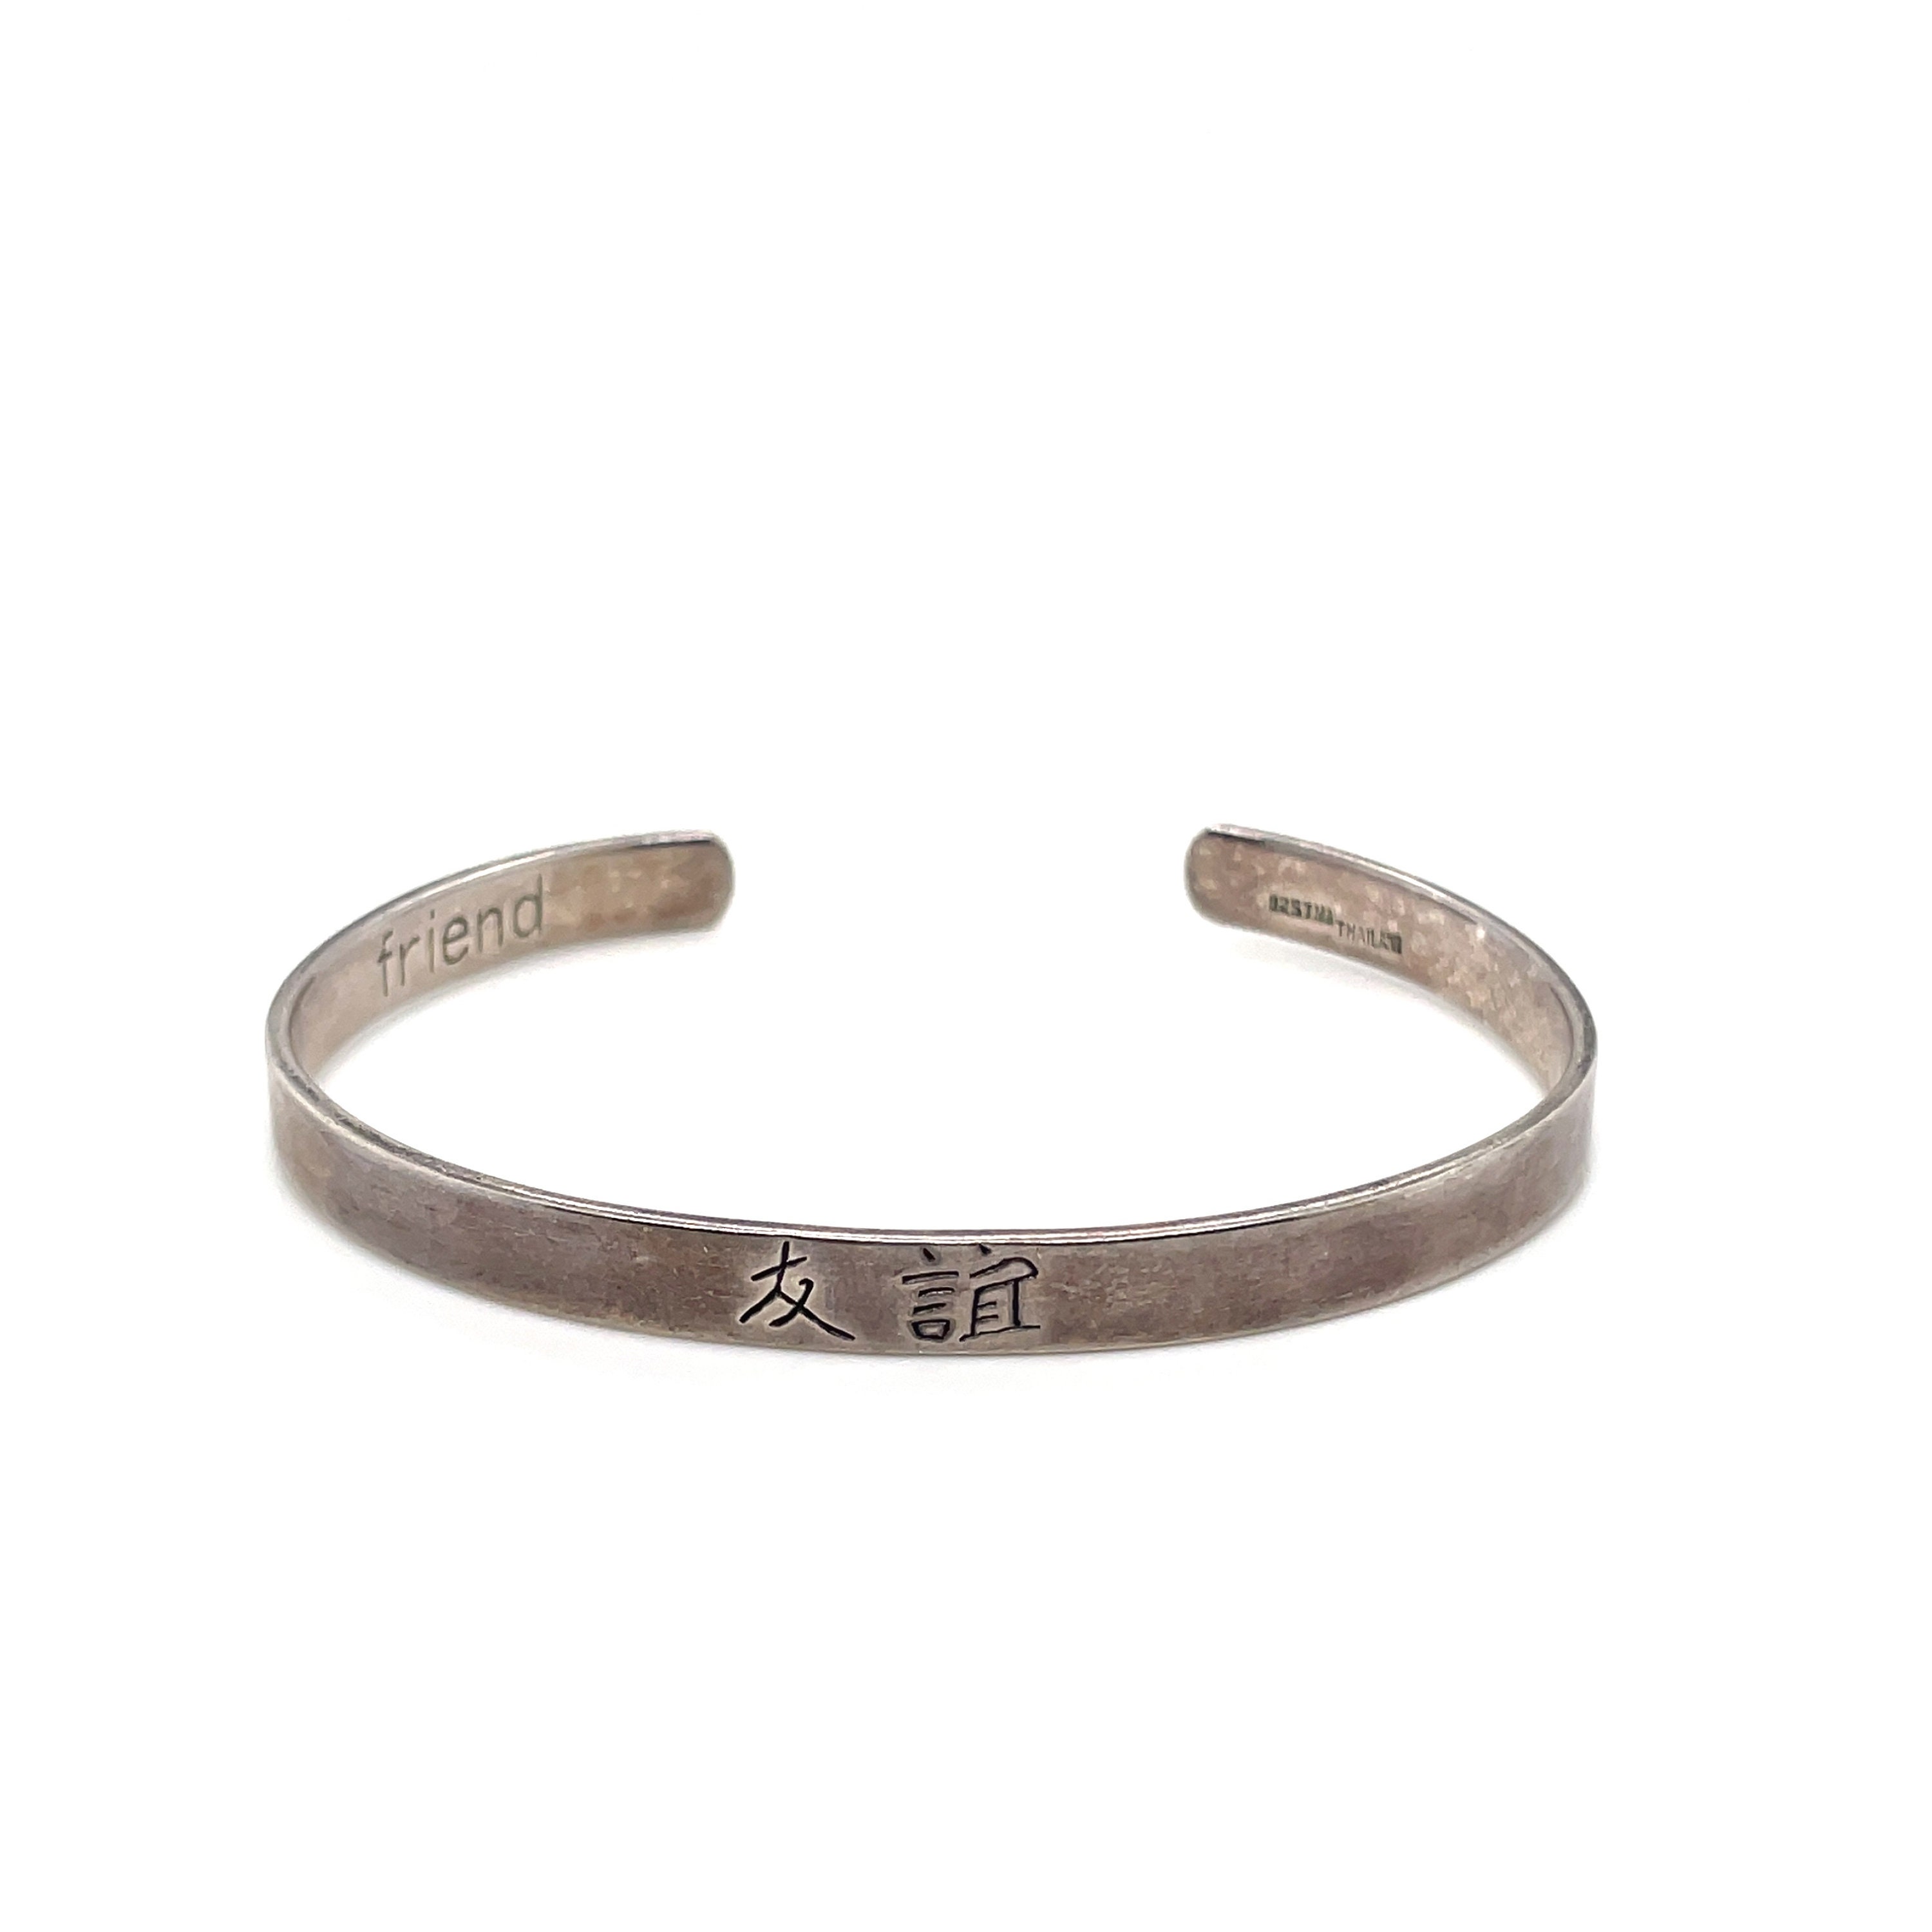 Buy FEELMEM Where You Lead I Will Follow Friendship Cuff Bangle Bracelet,Inspirational  Jewelry Mother Daughter Bracelet (Rose Gold) at Amazon.in